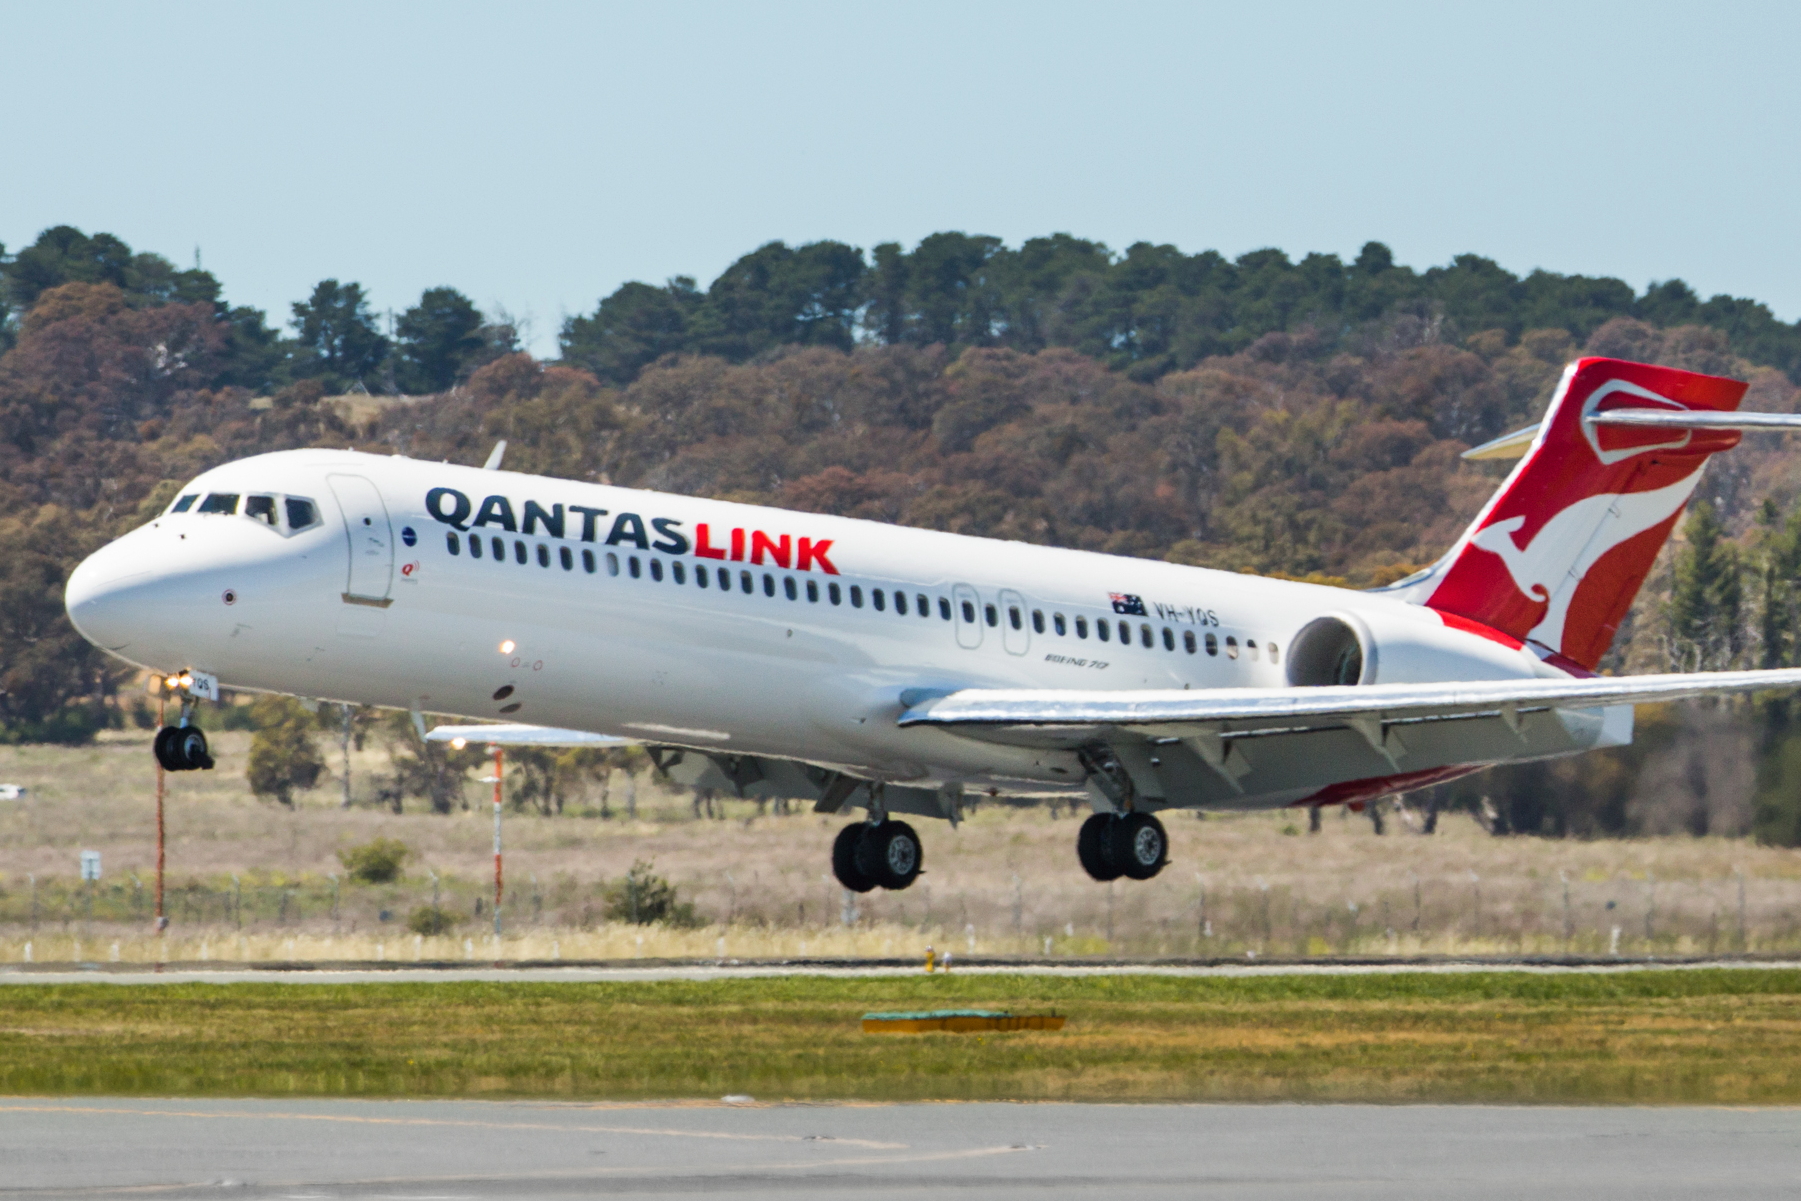 All flights are being operated by QantasLink’s dual class Boeing 717s featuring 12 seats in Business and 98 seats in Economy, offering around 2,500 seats per week across the three routes. Click to enlarge.